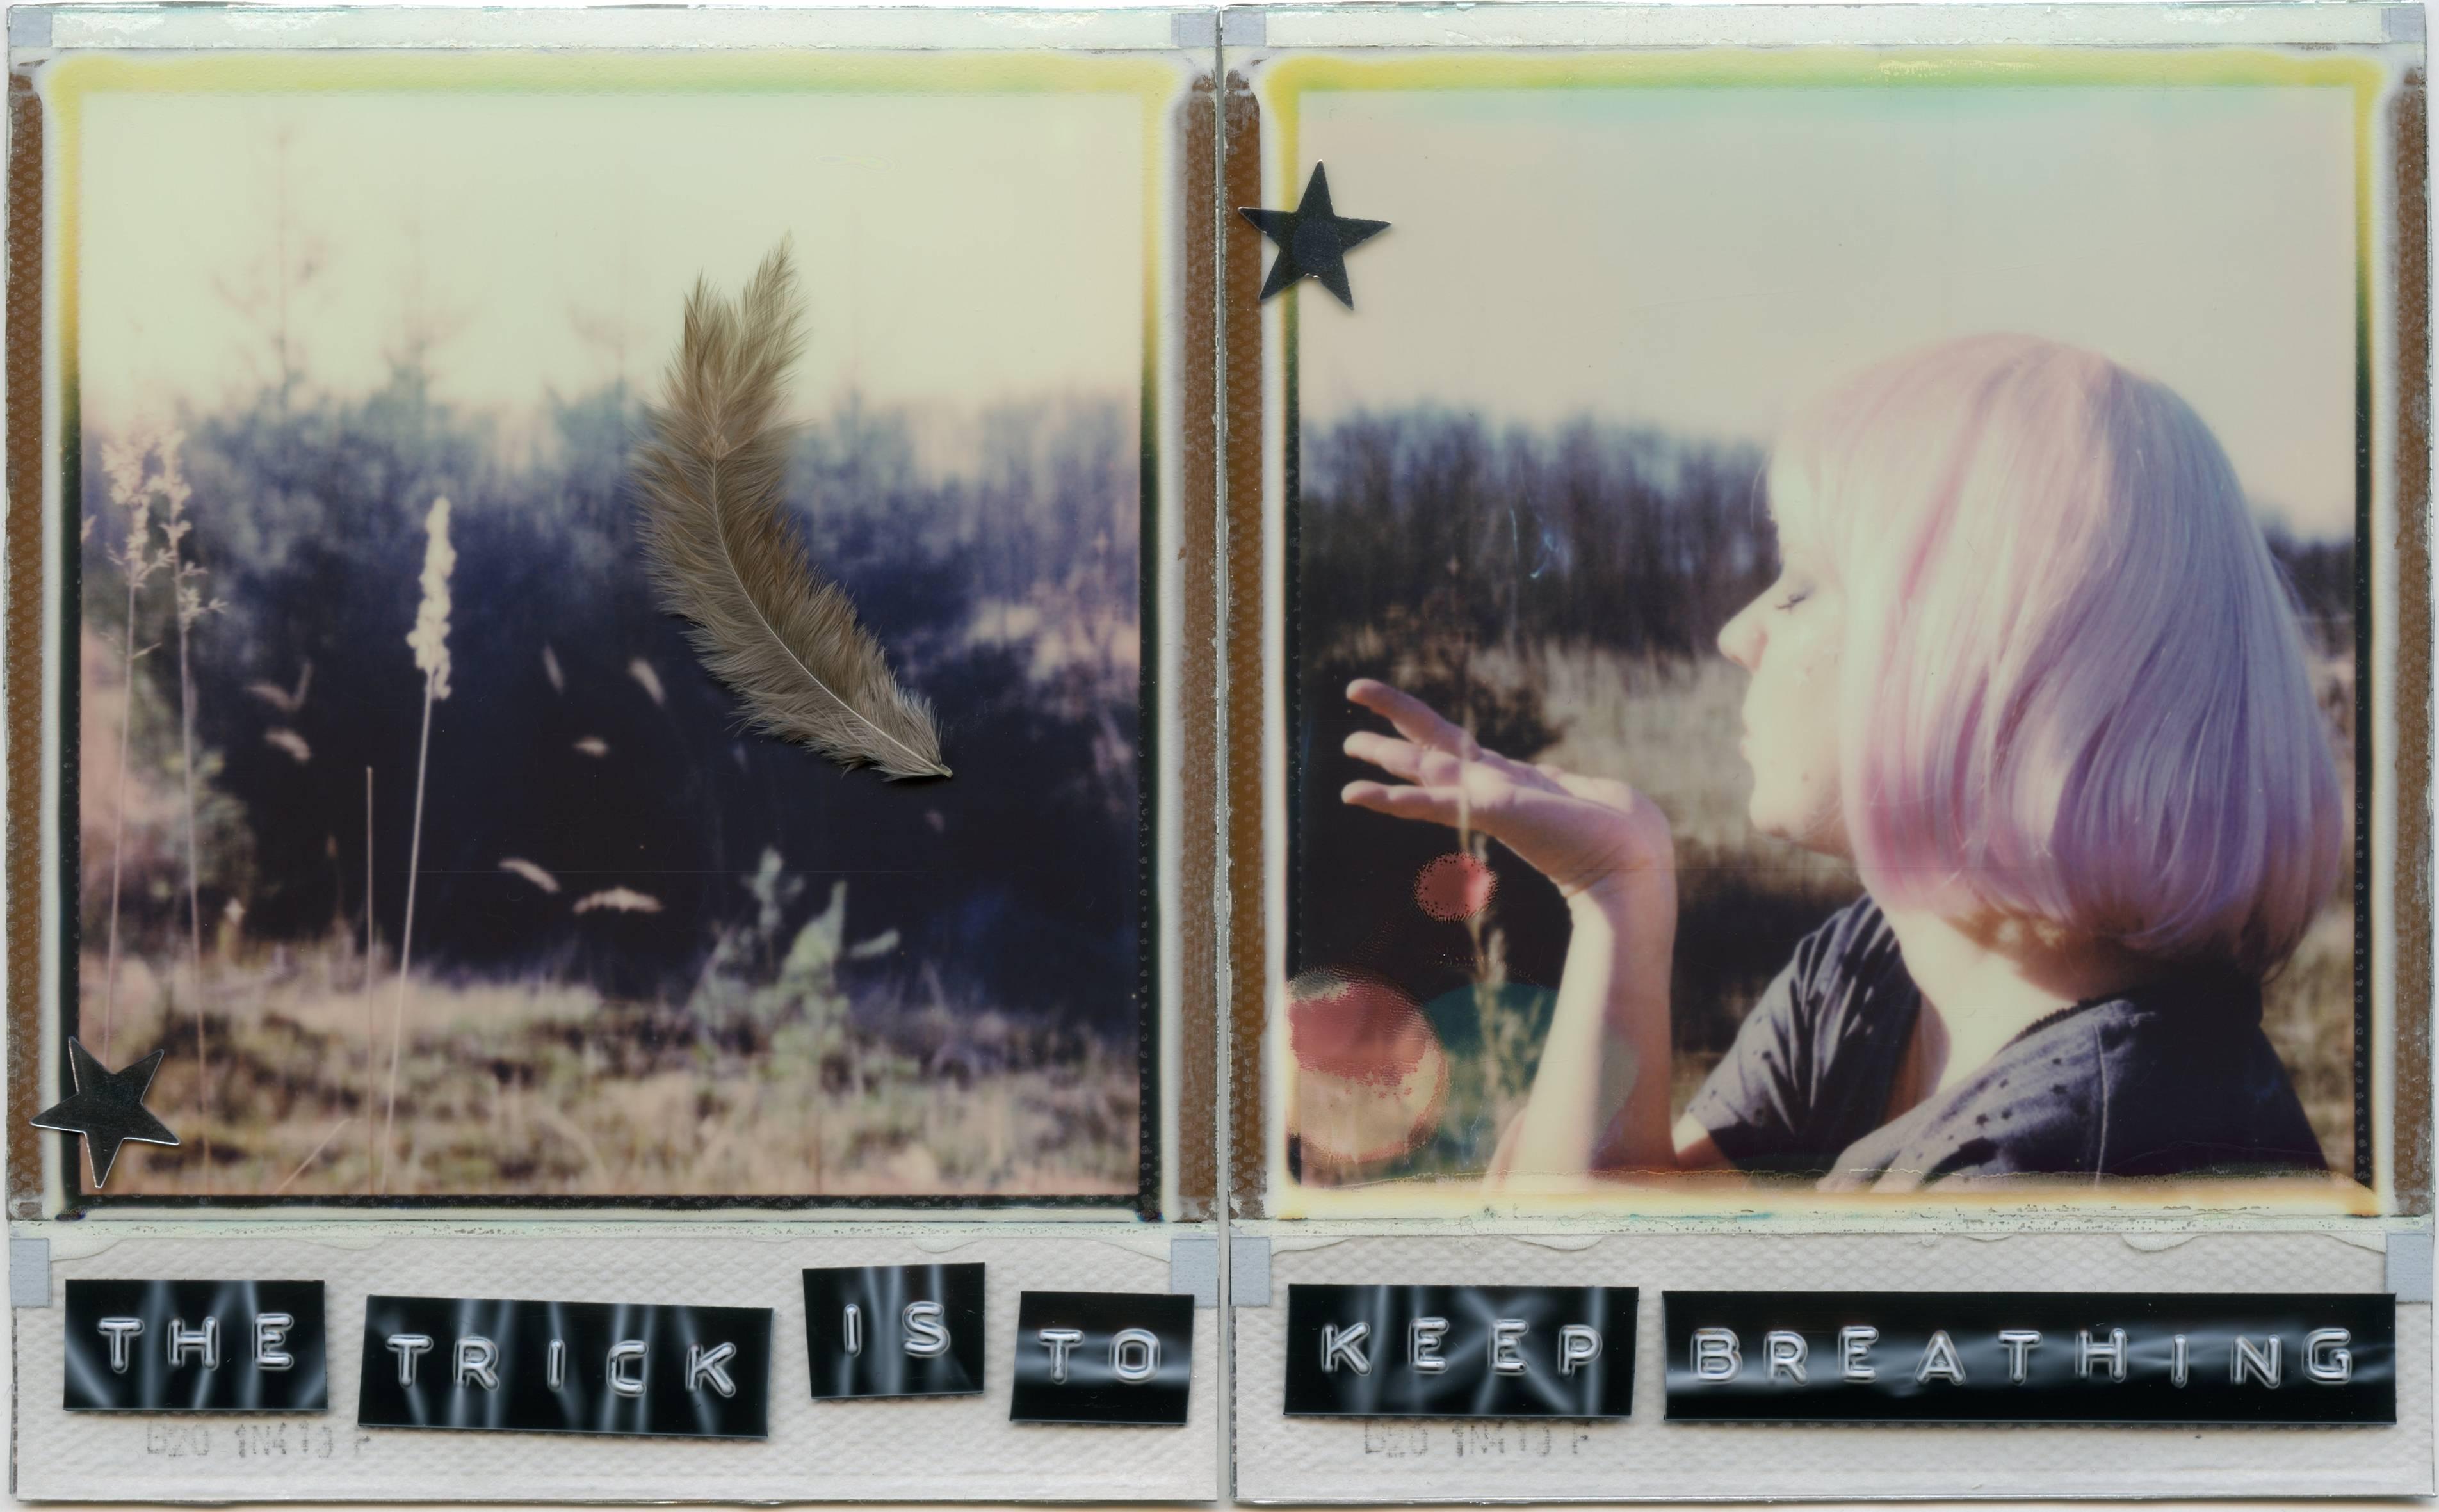 Julia Beyer Color Photograph – The Trick Is To Keep Breathing - based on 2 Polaroids